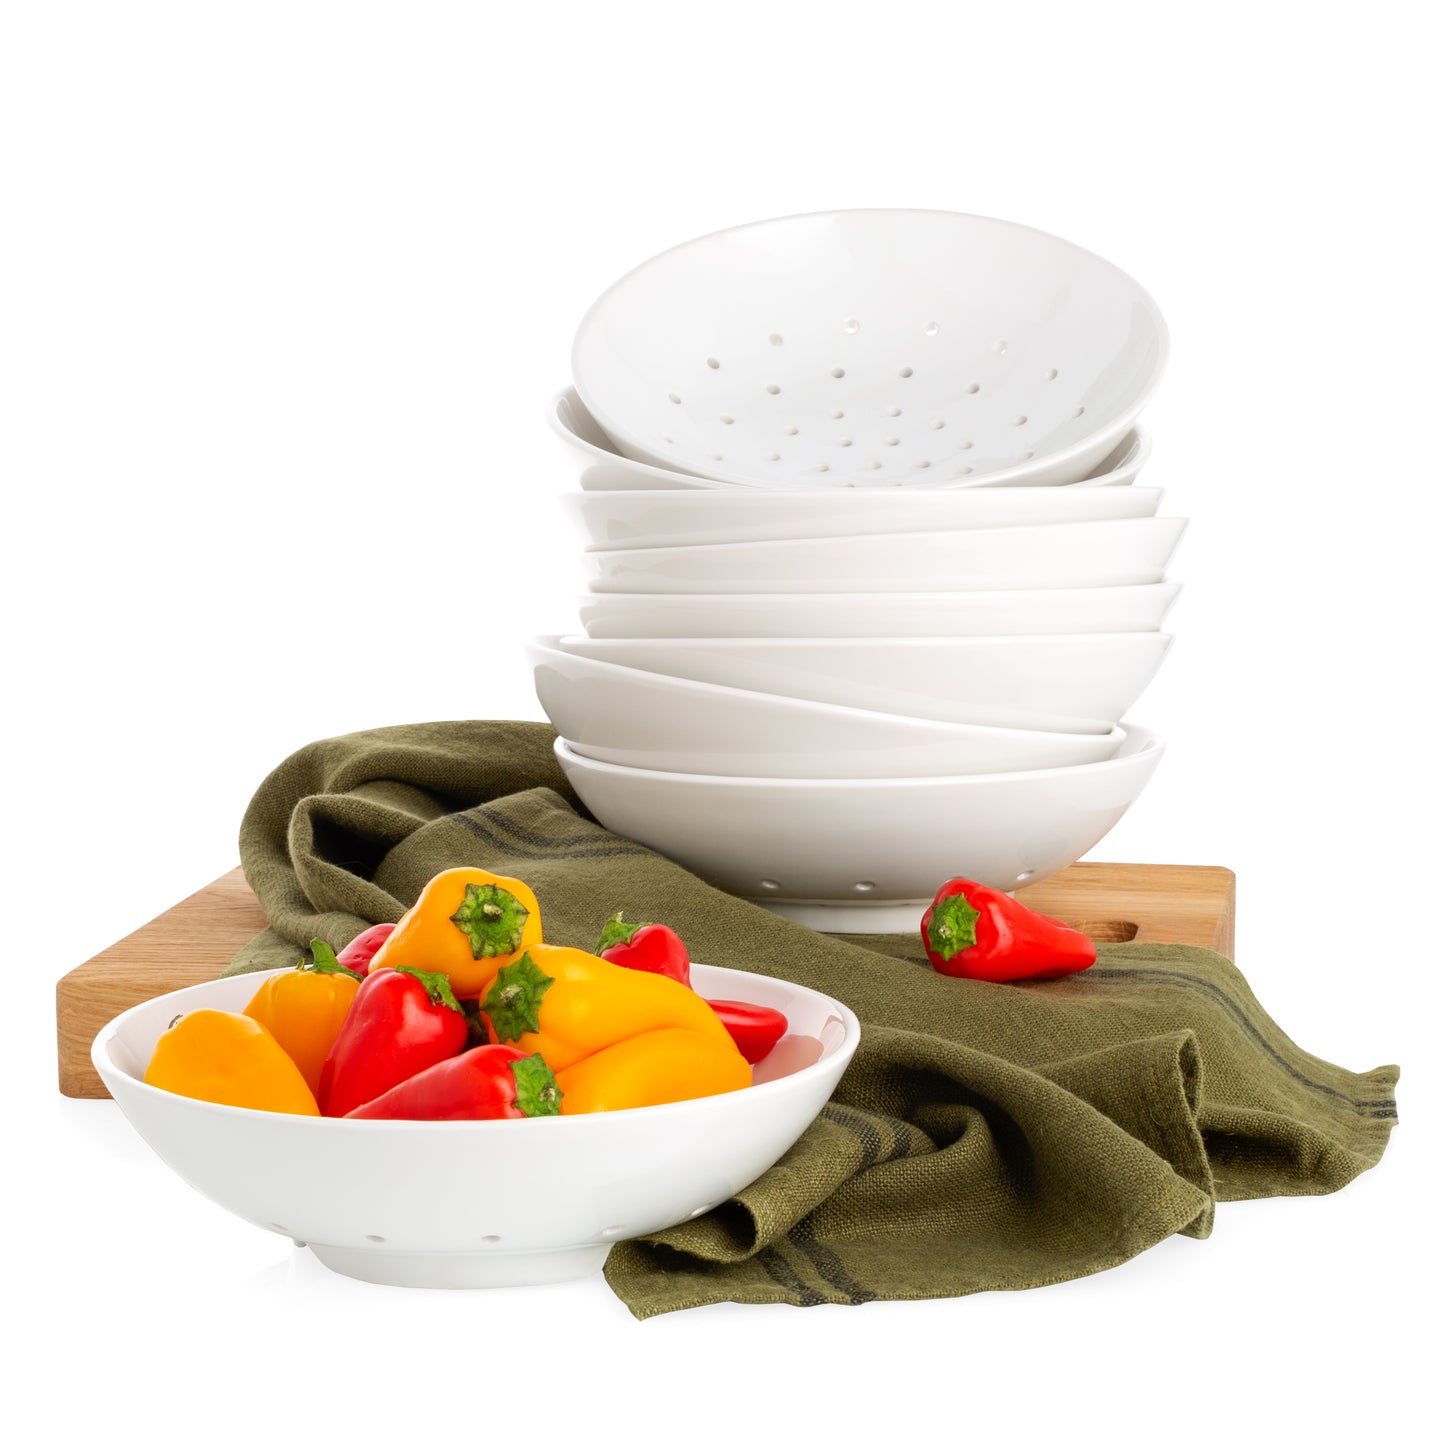 Hudson Grace White Ceramic Berry Bowl stacked with red and yellow peppers, a green towel and wood serving board